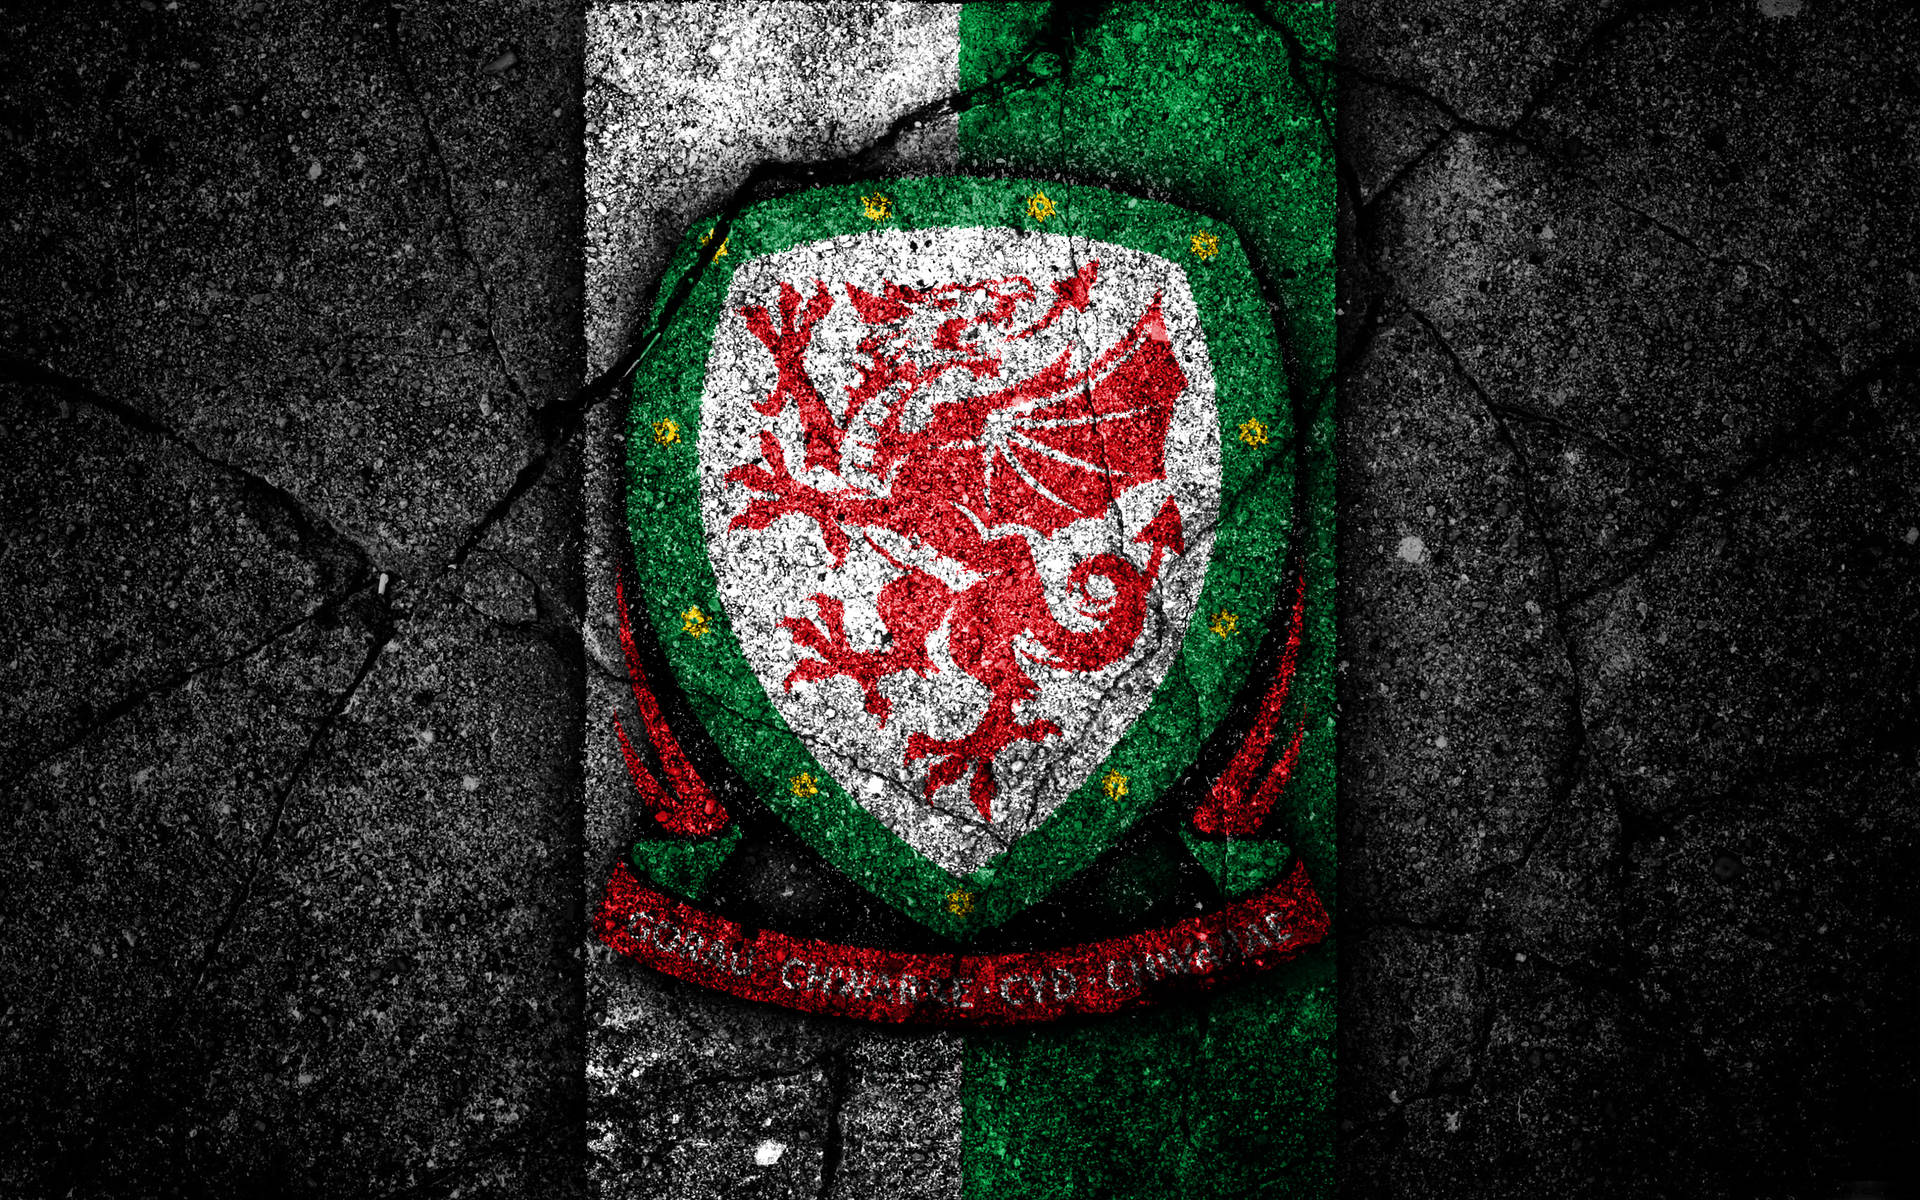 Wales National Football Team Logo On Cracked Pavement